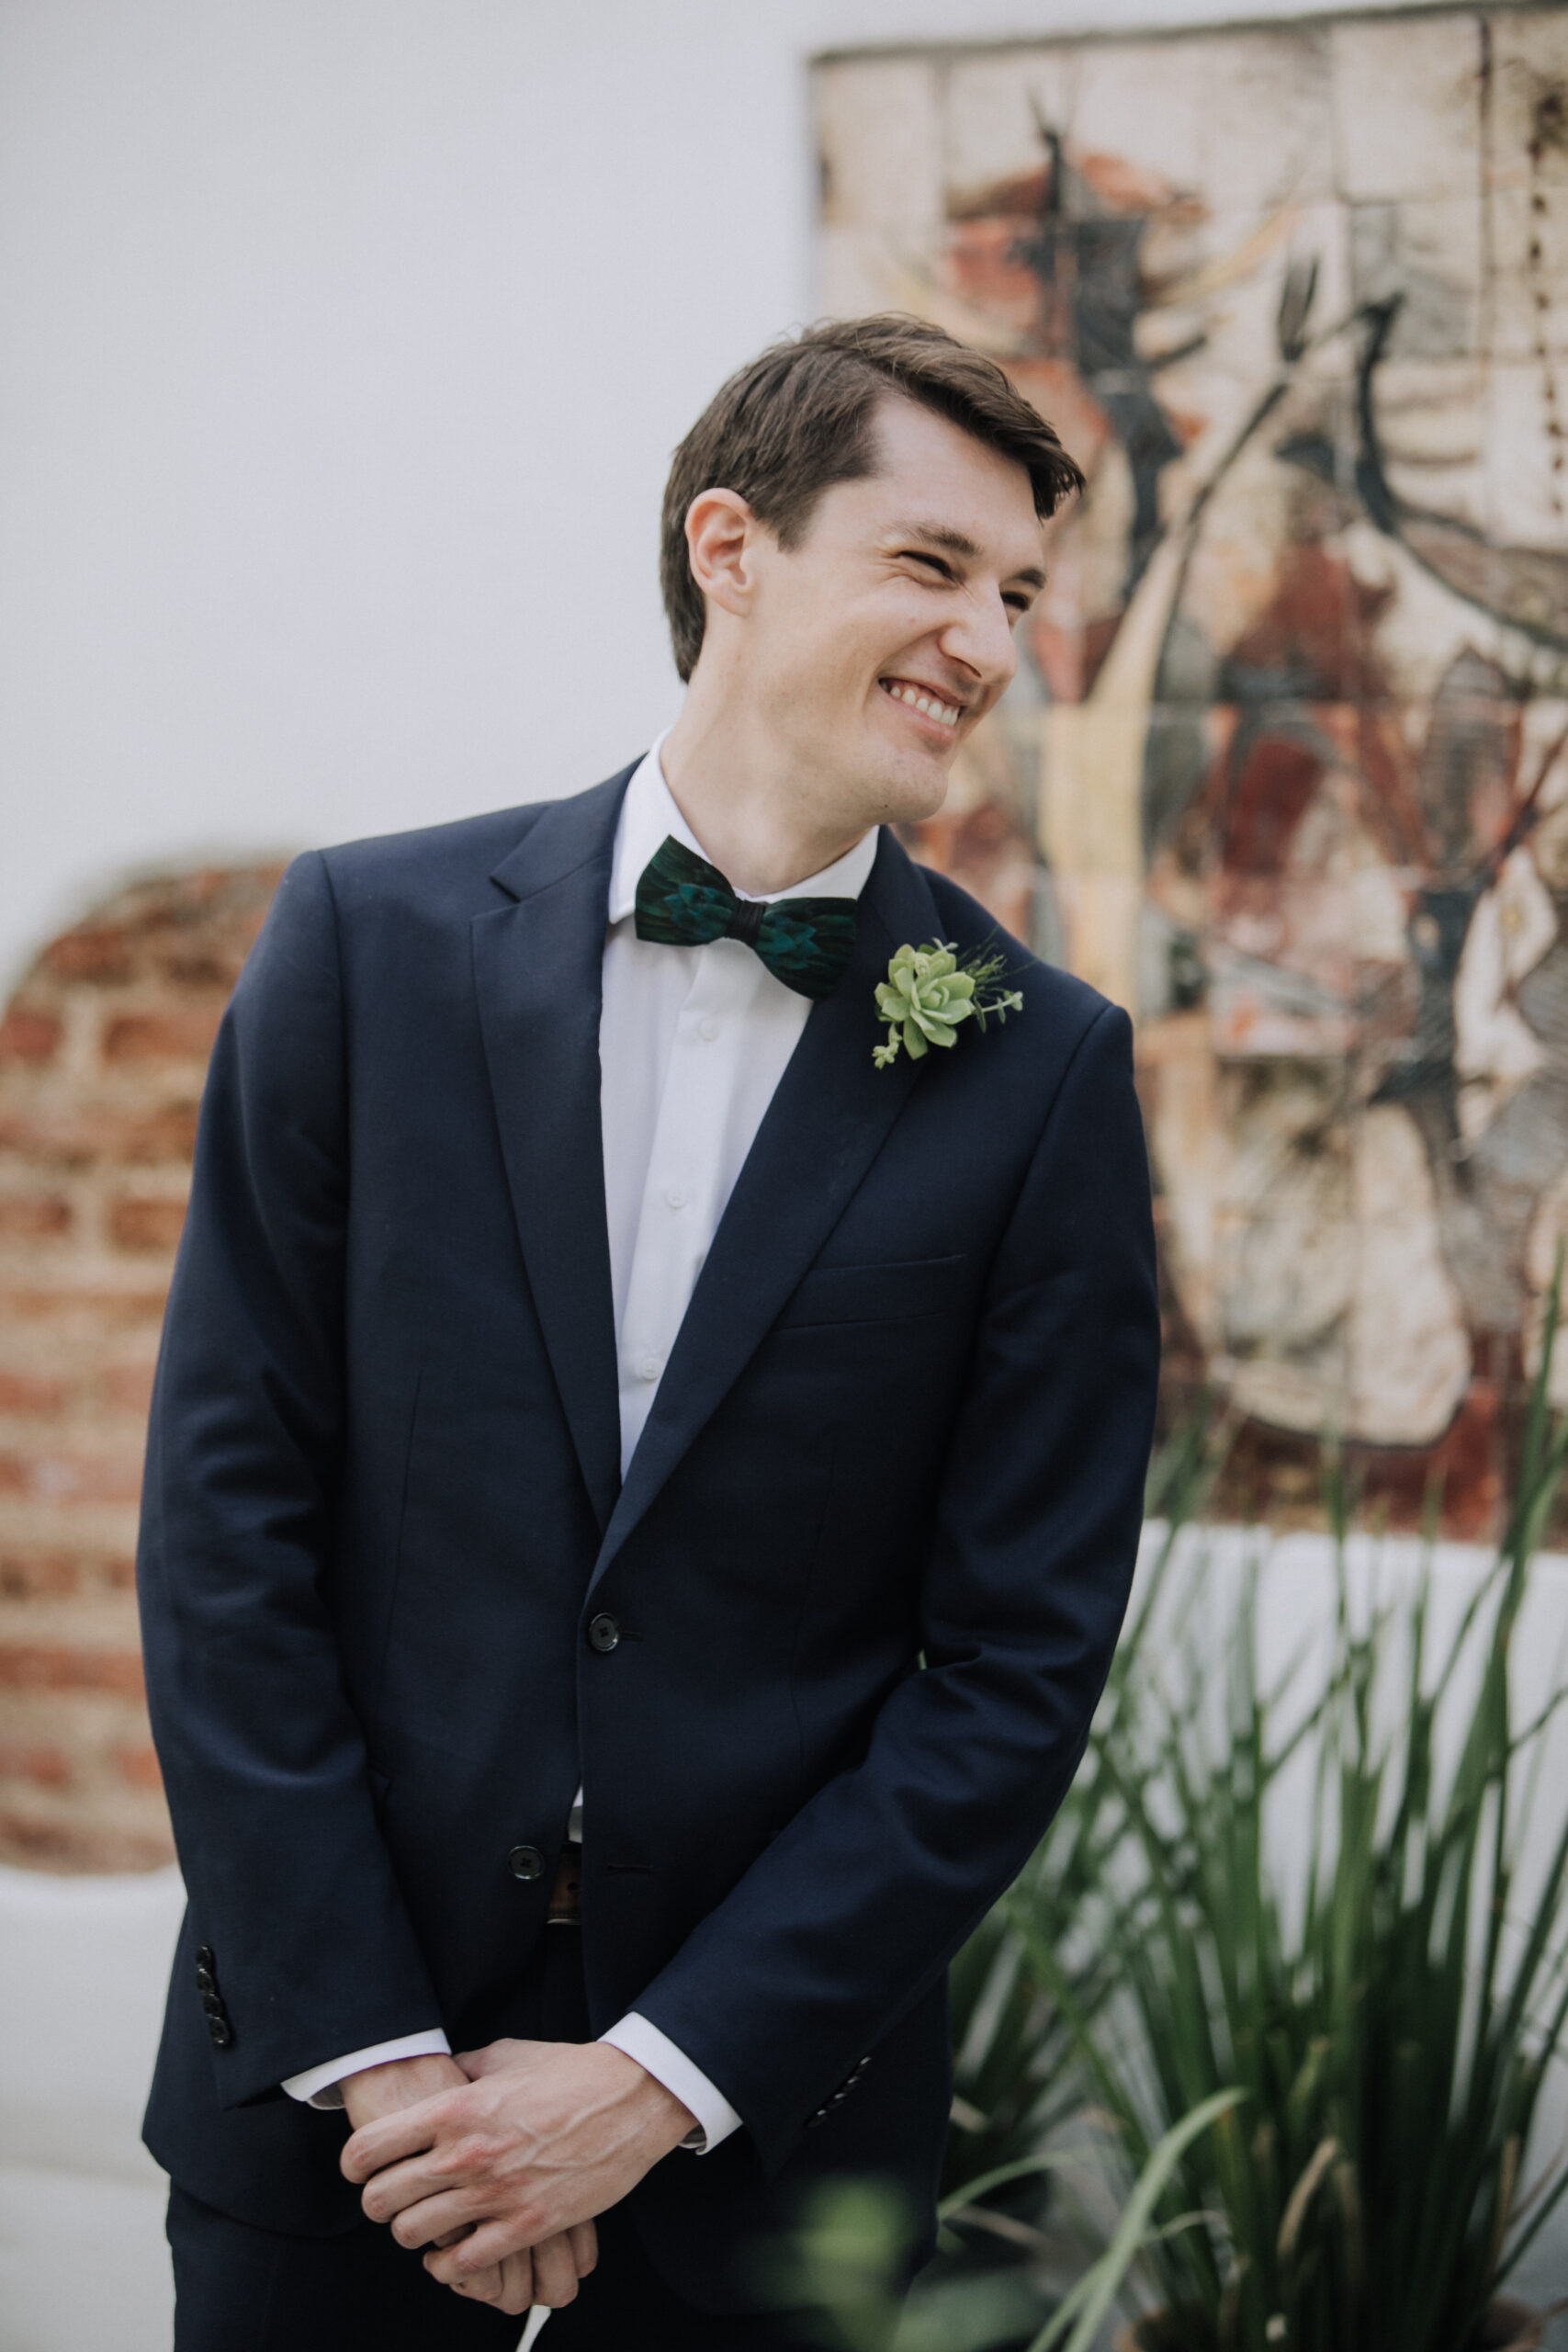 groom patiently awaits his bride at their first look photoshoot